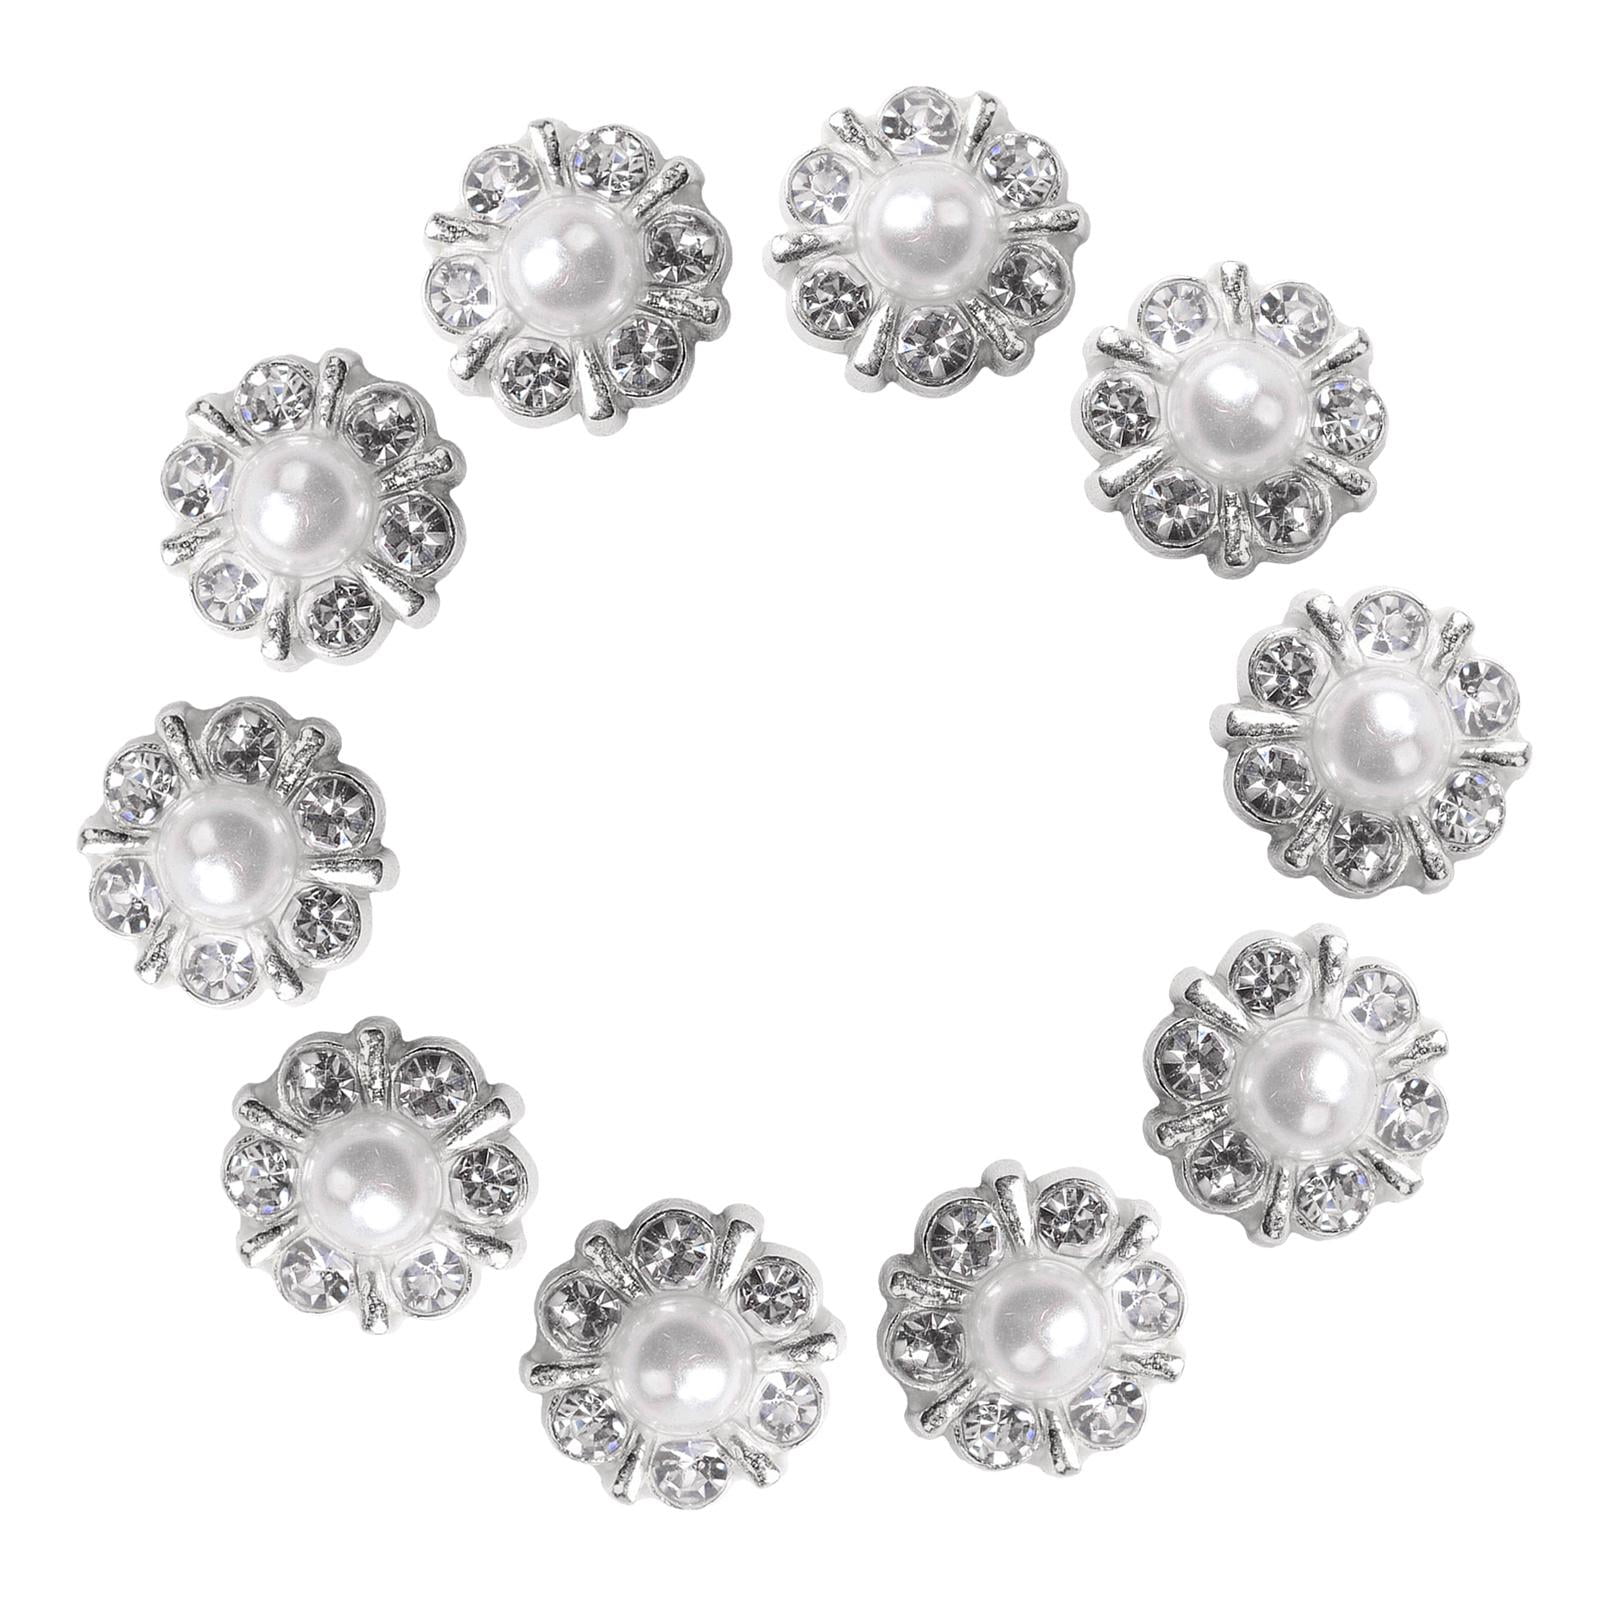 10Pcs Pearl Rhinestone Buttons Vintage Metal Button Alloy Diamante Flower Crystal  Buttons DIY Hair Clip/Bows Wedding Decoration SewingAccessories